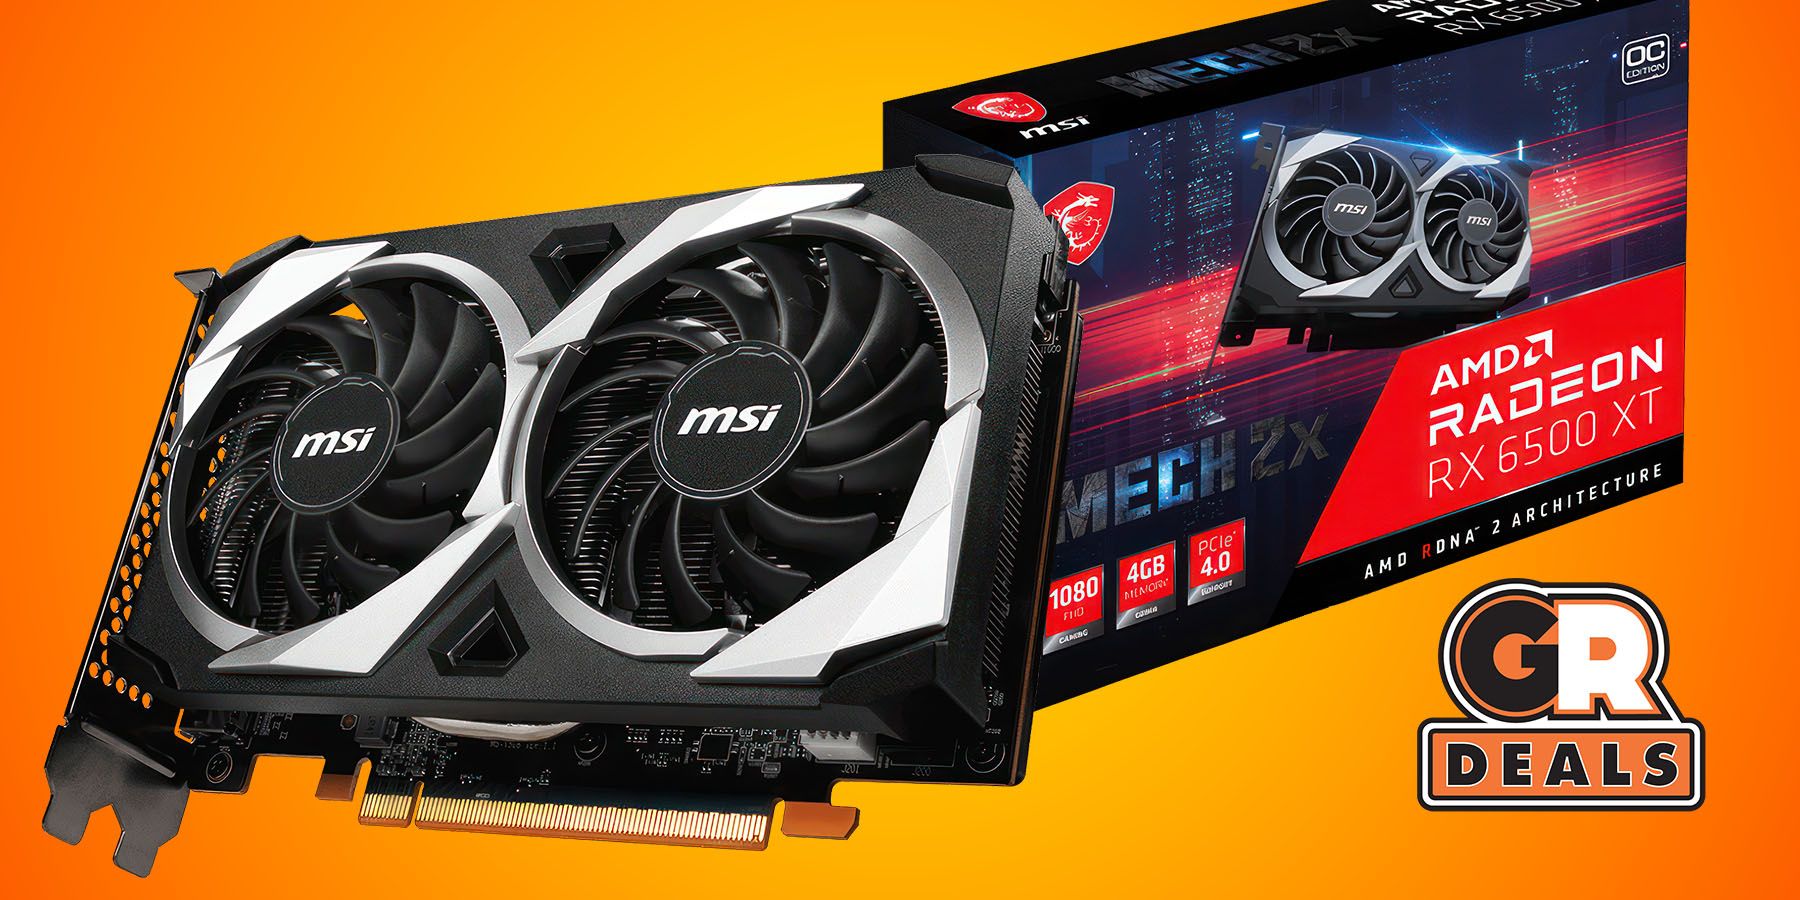 Get the MSI Gaming AMD Radeon RX 6500 XT Graphics Card Now for a ...